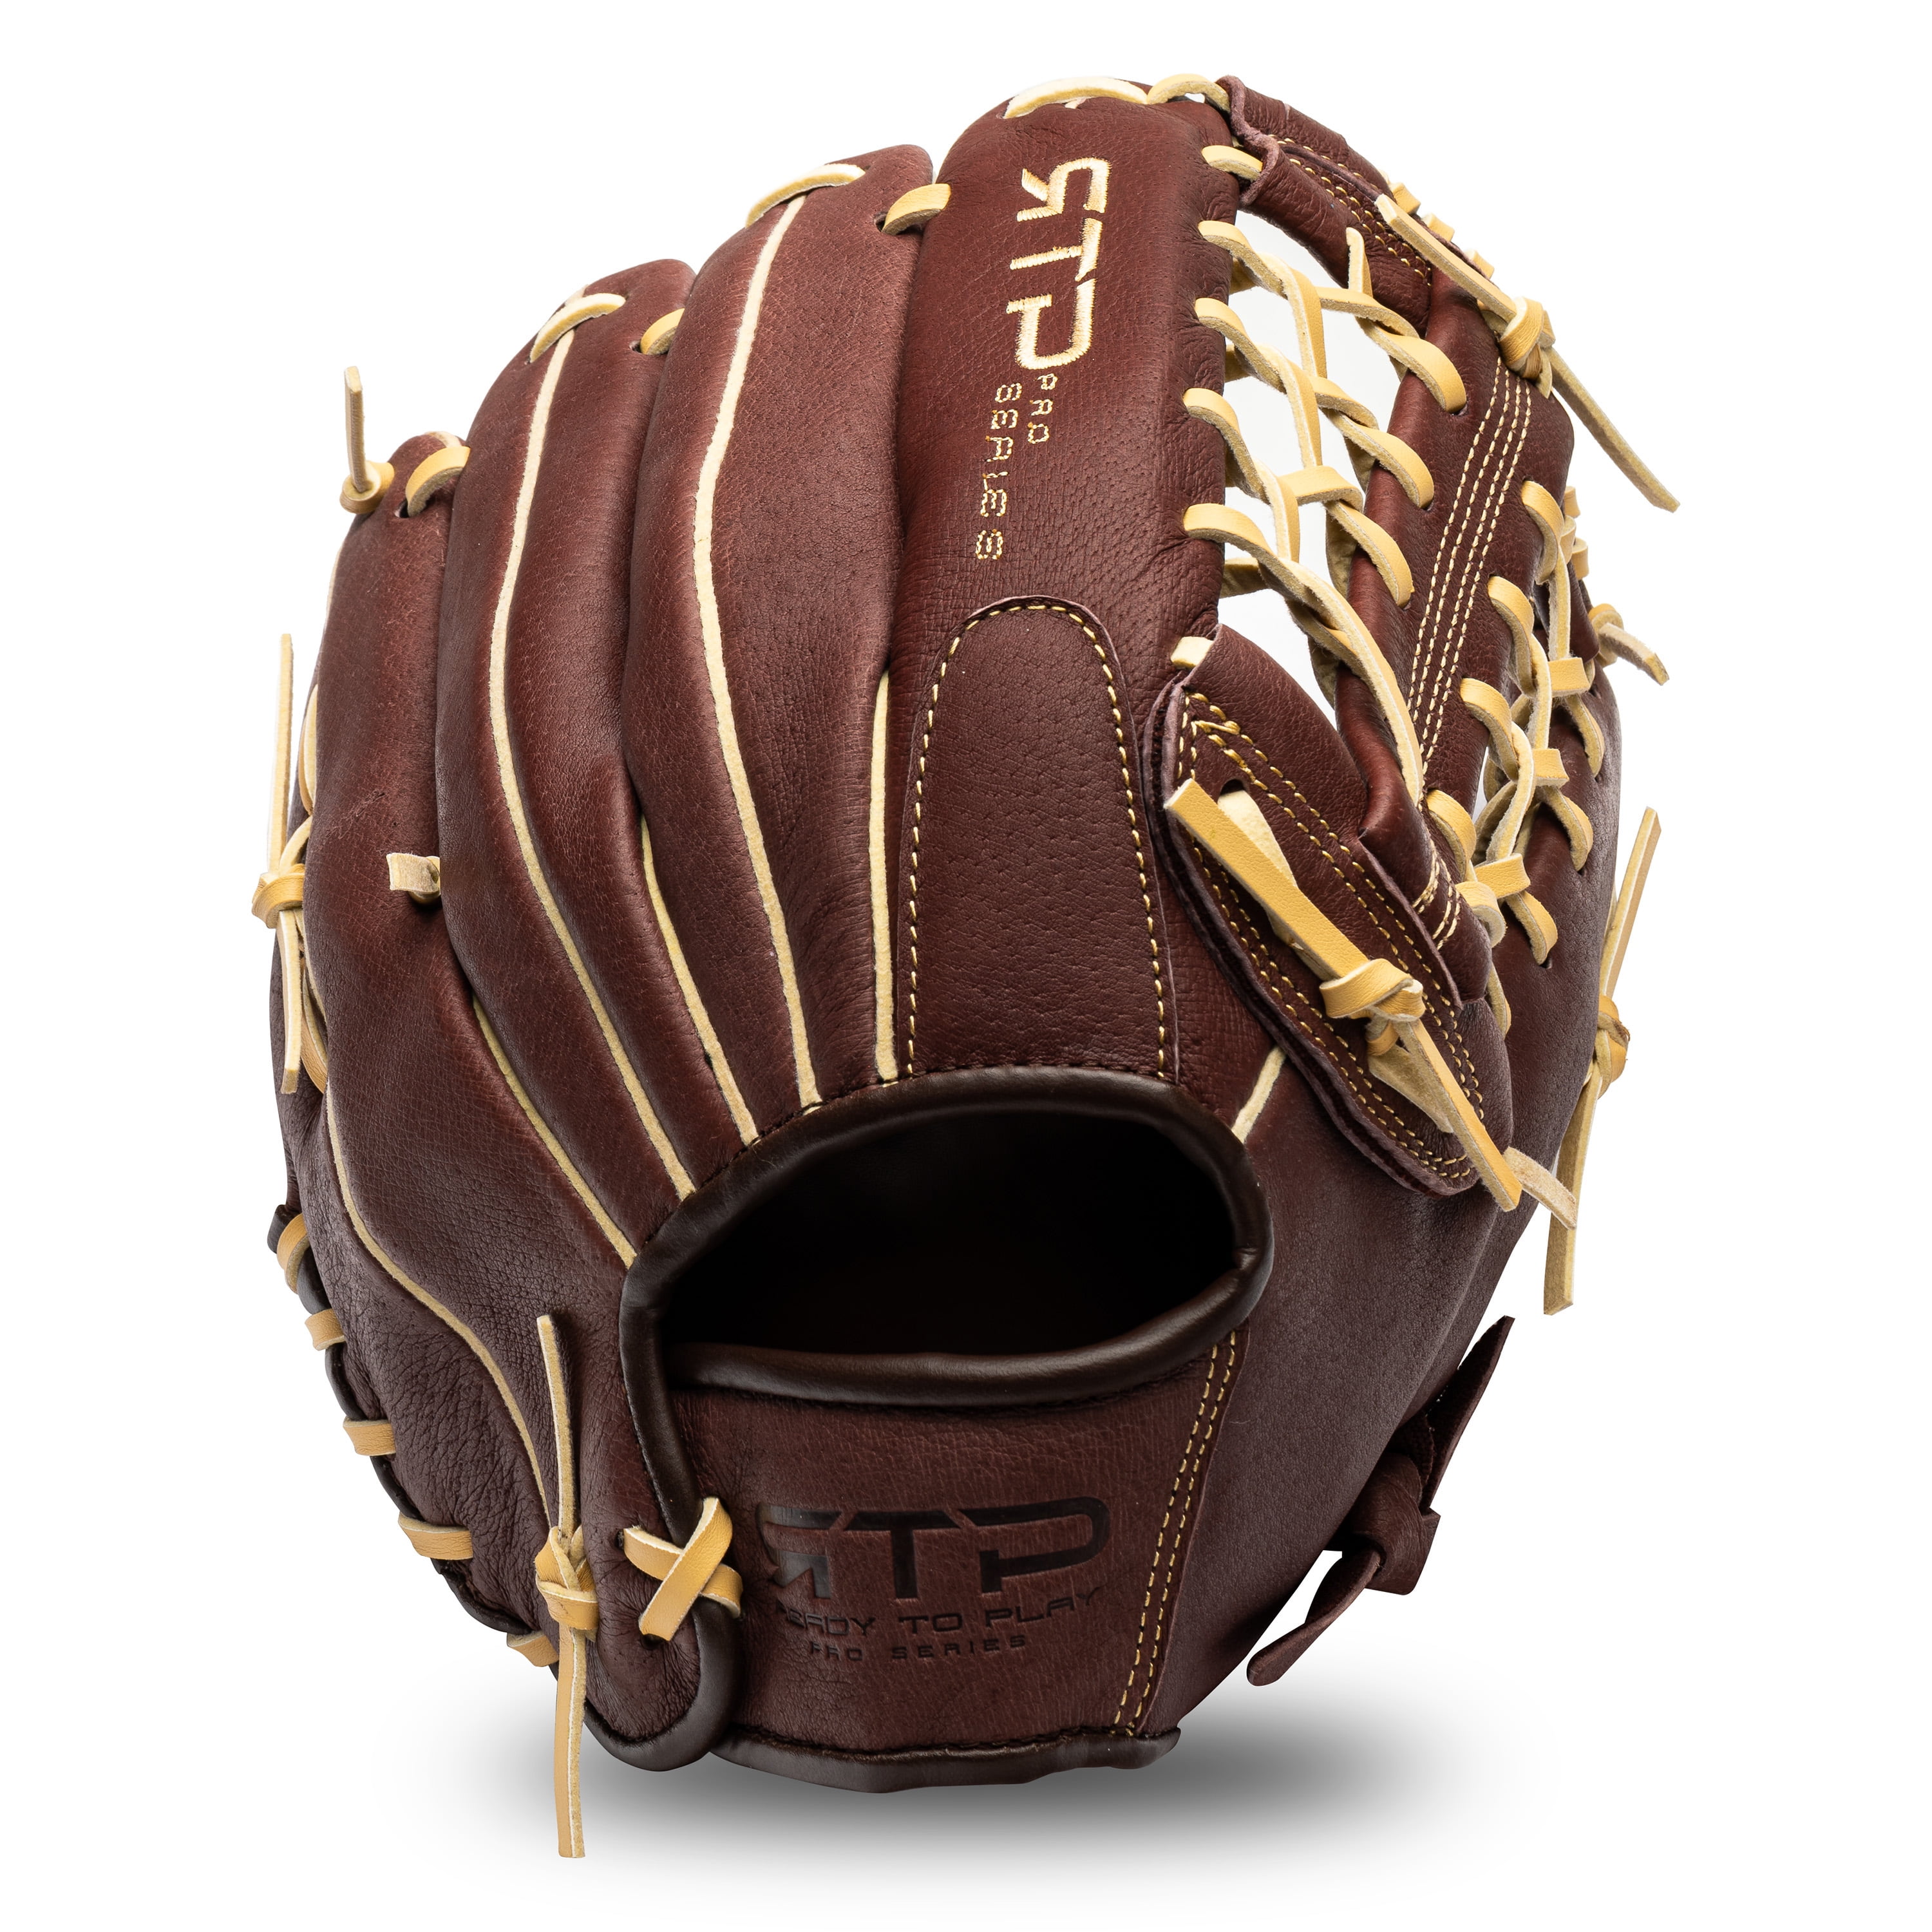 RHT Details about   Franklin Sports Ready-To-Play Pro Series Leather Baseball Fielding Gloves 